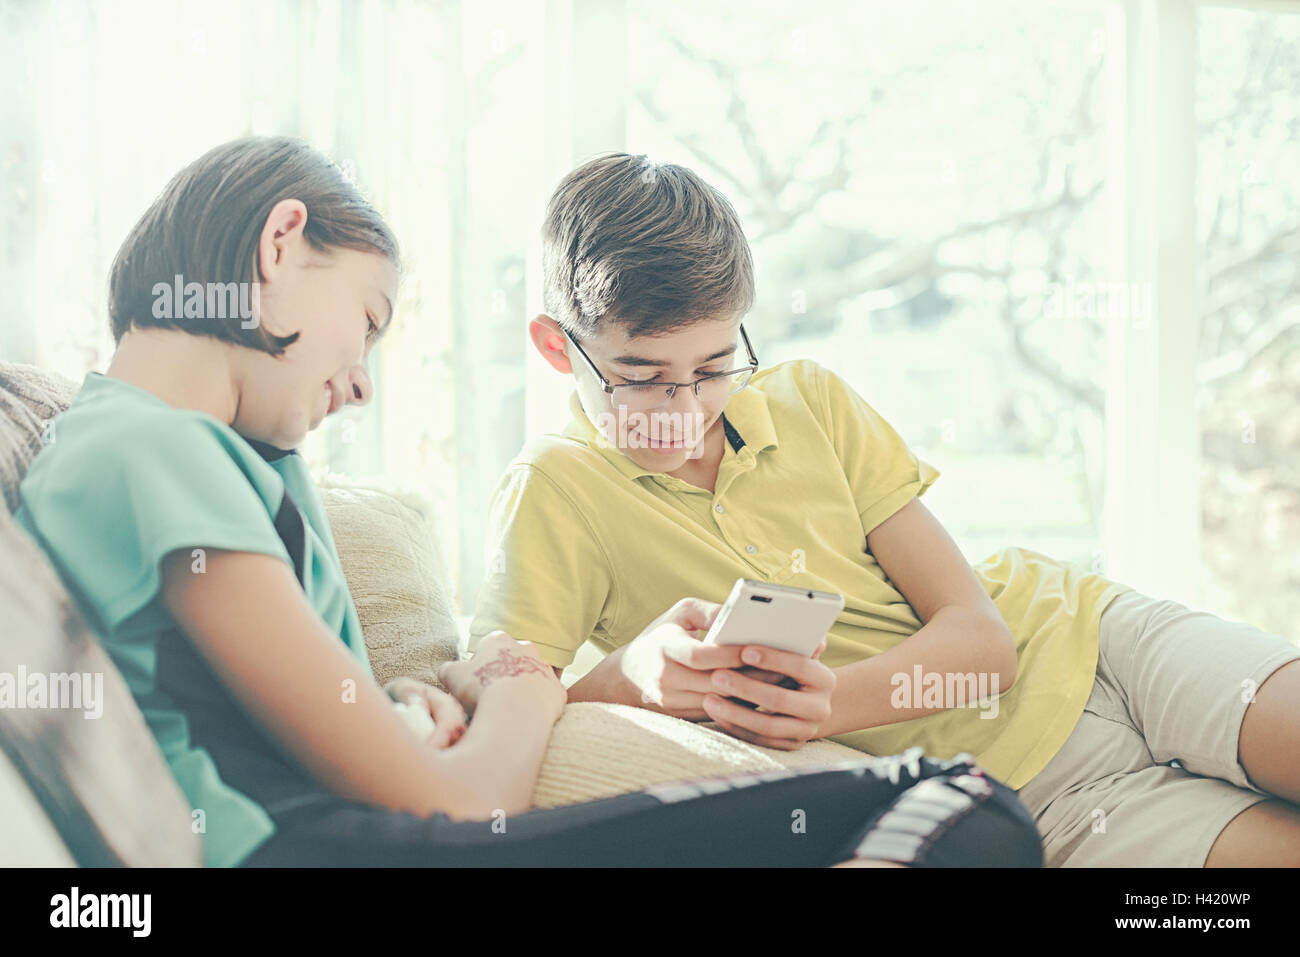 Mixed Race brother and sister texting on cell phone near window Stock Photo